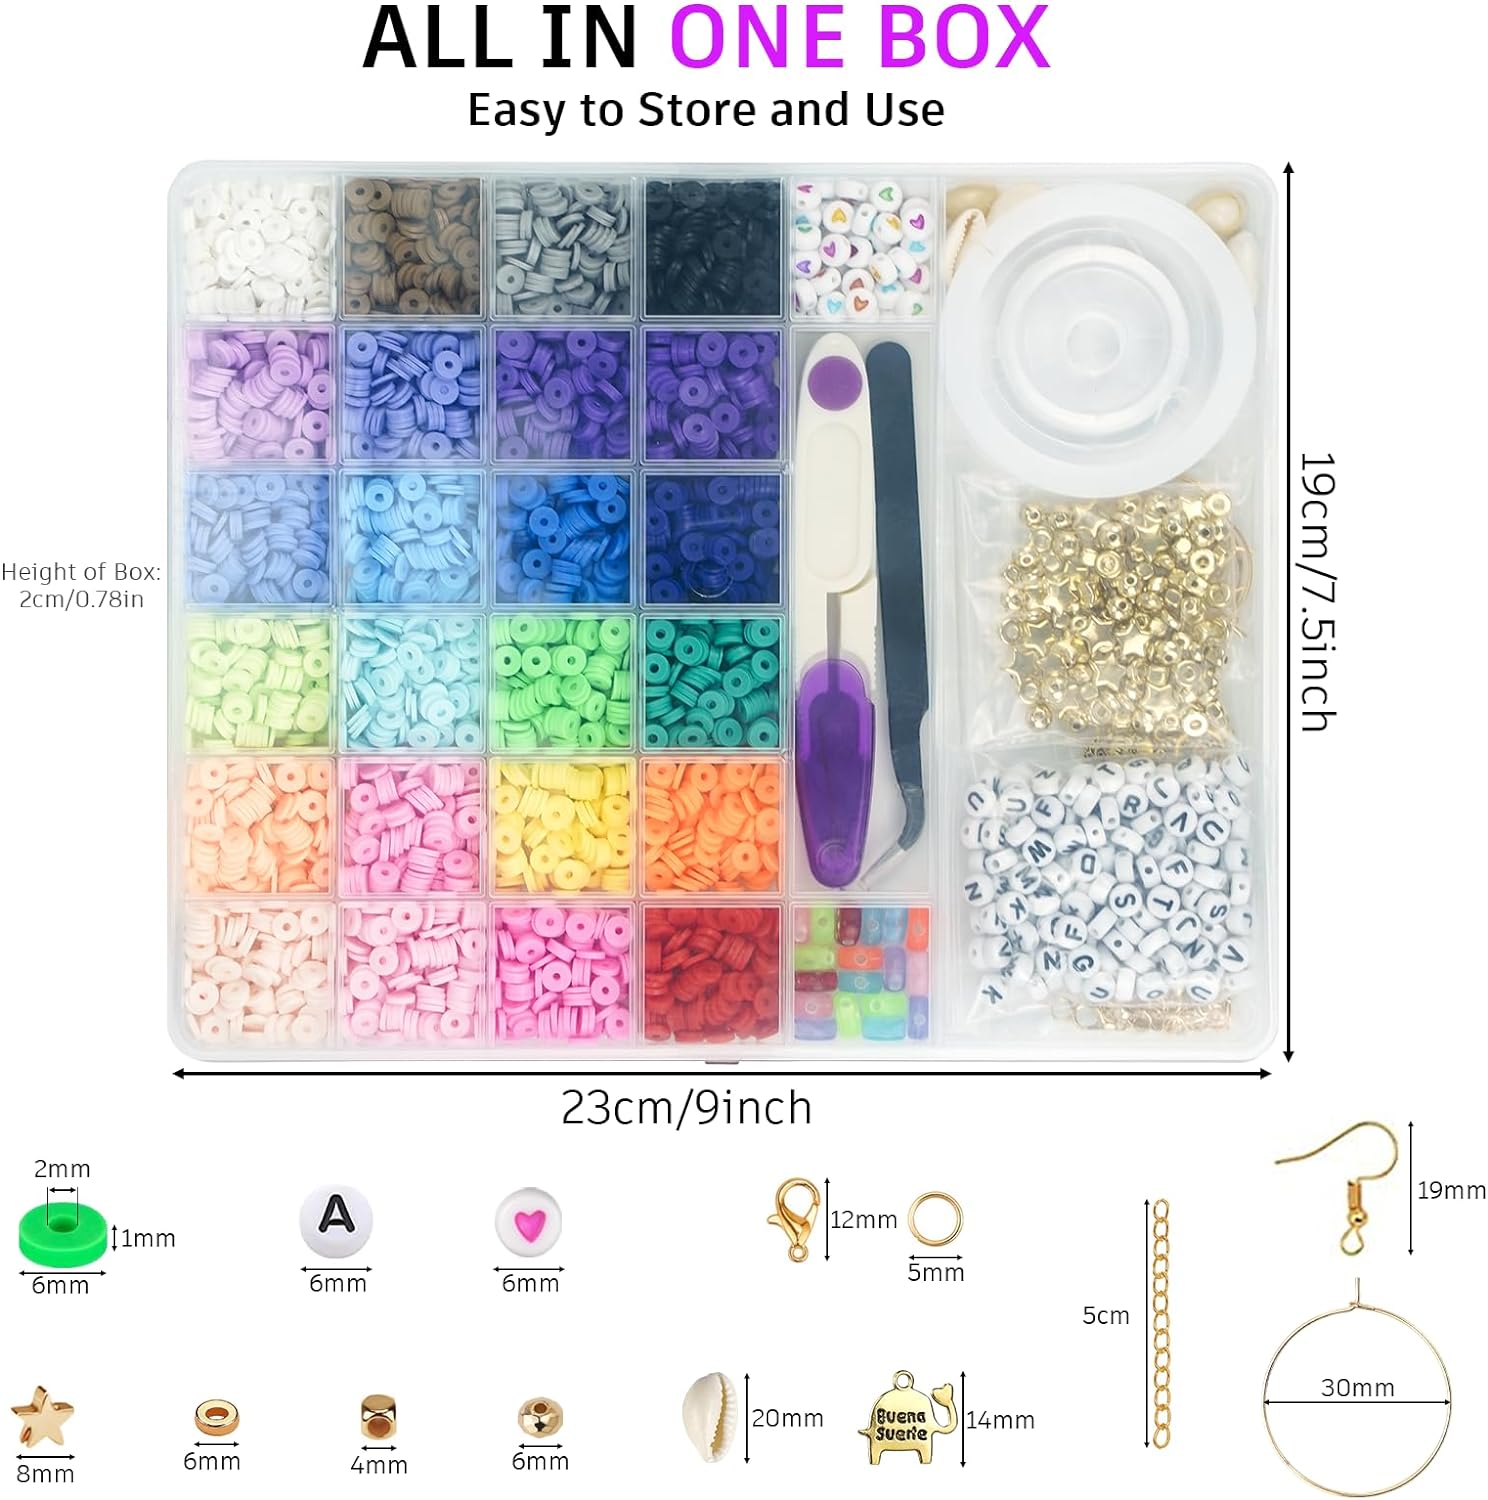 Gionlion 6000 Pcs Clay Beads for Bracelet Making, 24 Colors Flat Preppy Beads for Friendship Bracelet Kit, Polymer Clay Heishi Beads with Charms for Jewelry Making, Crafts Gifts for Teen Girls